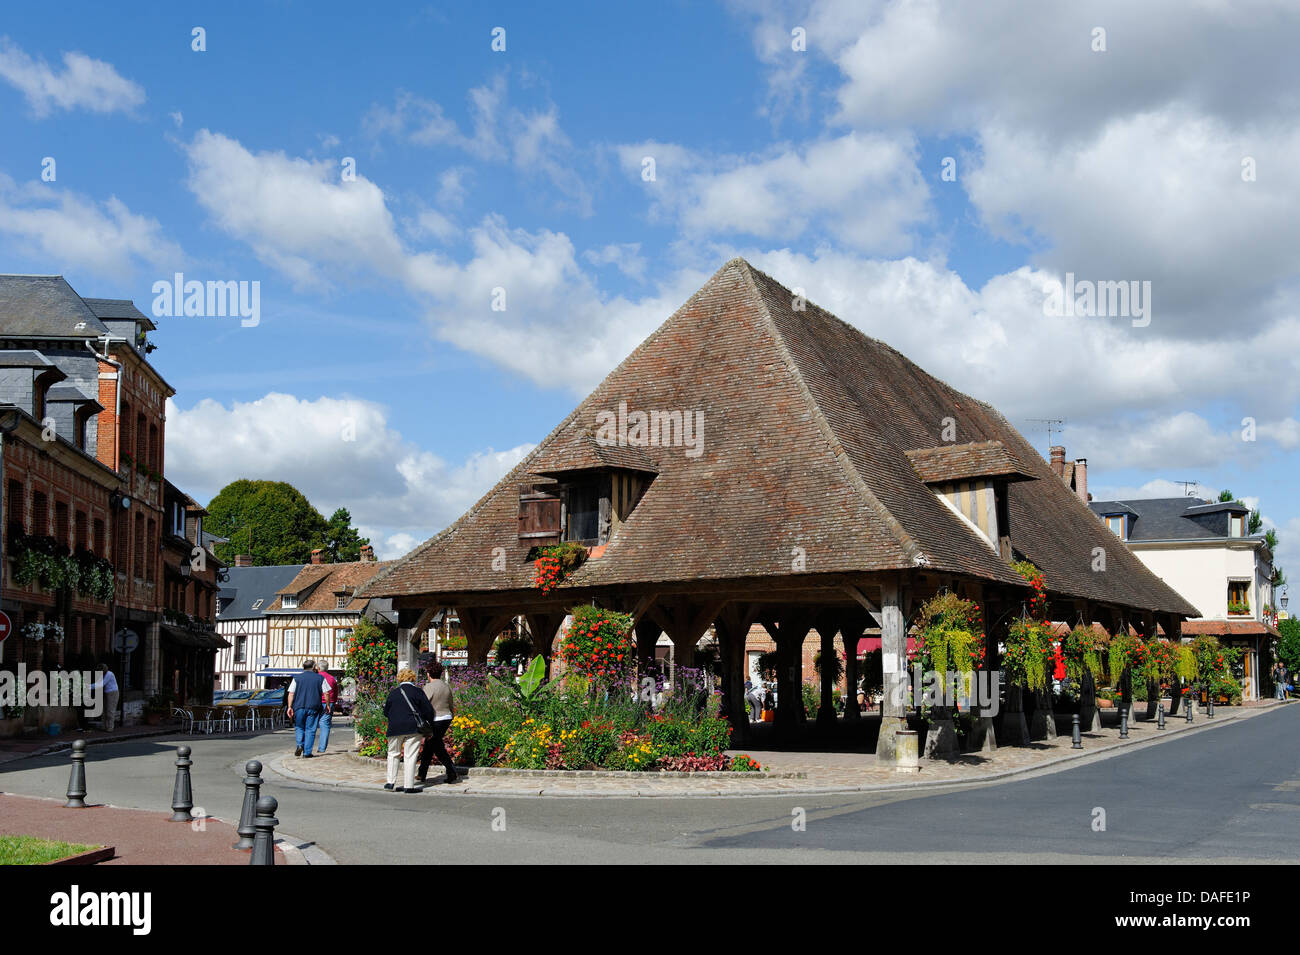 France, Lyons-la-Foret, View of Market hall Stock Photo